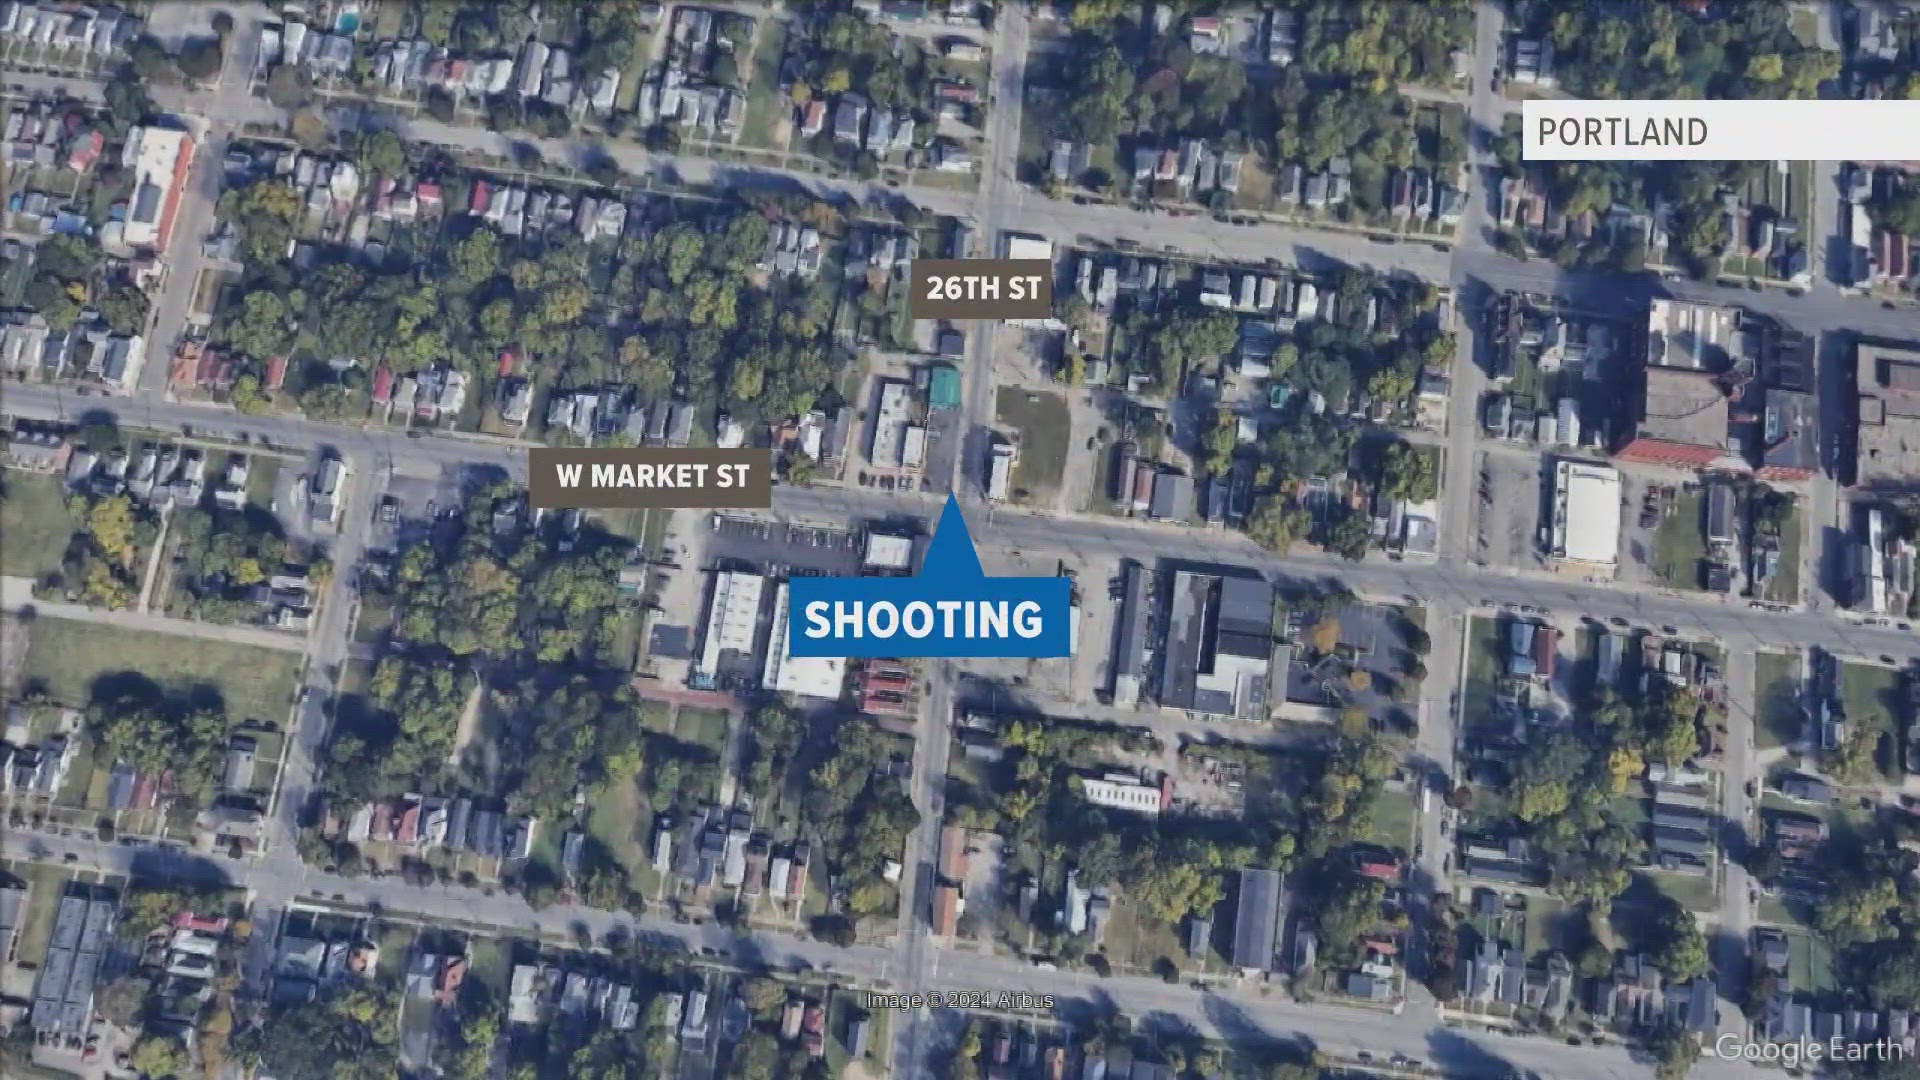 Police said when they arrived at the area of 26th and Market Streets, they found a woman who had been shot.